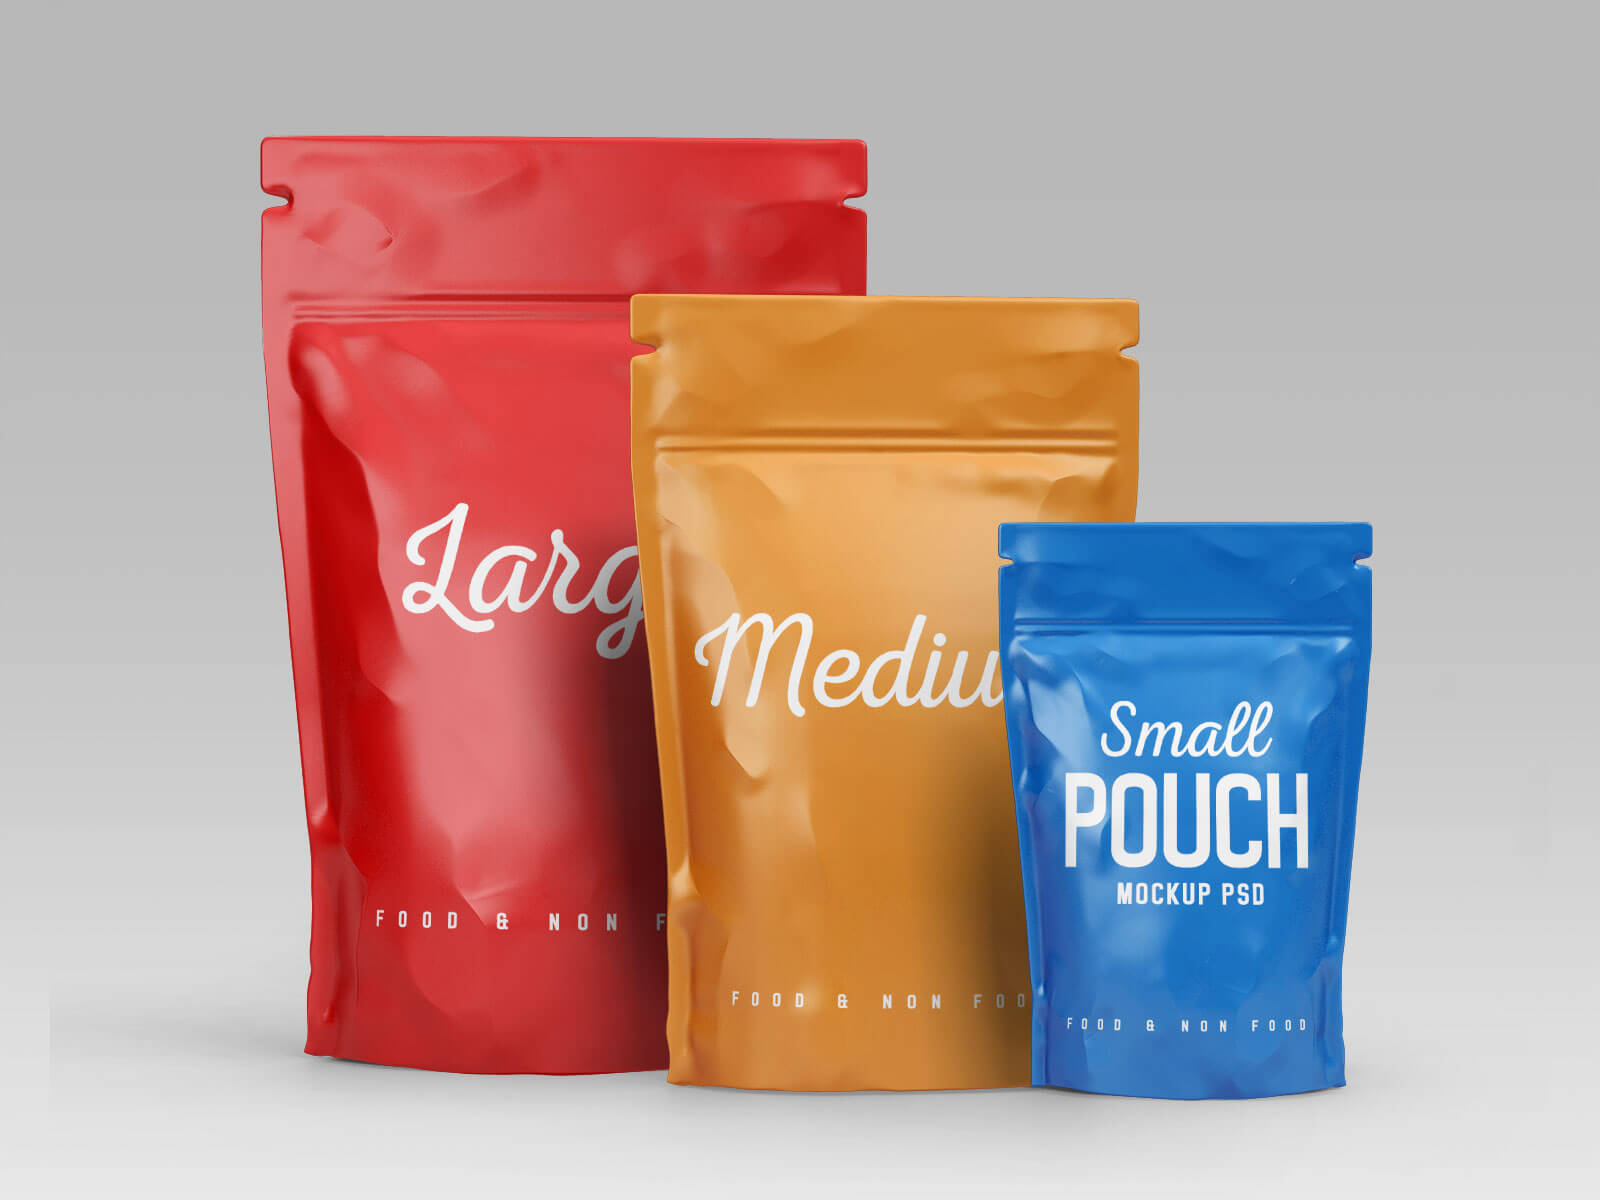 Free Stand-up Pouch (Doypack) Food Packaging Mockup PSD Set (3)